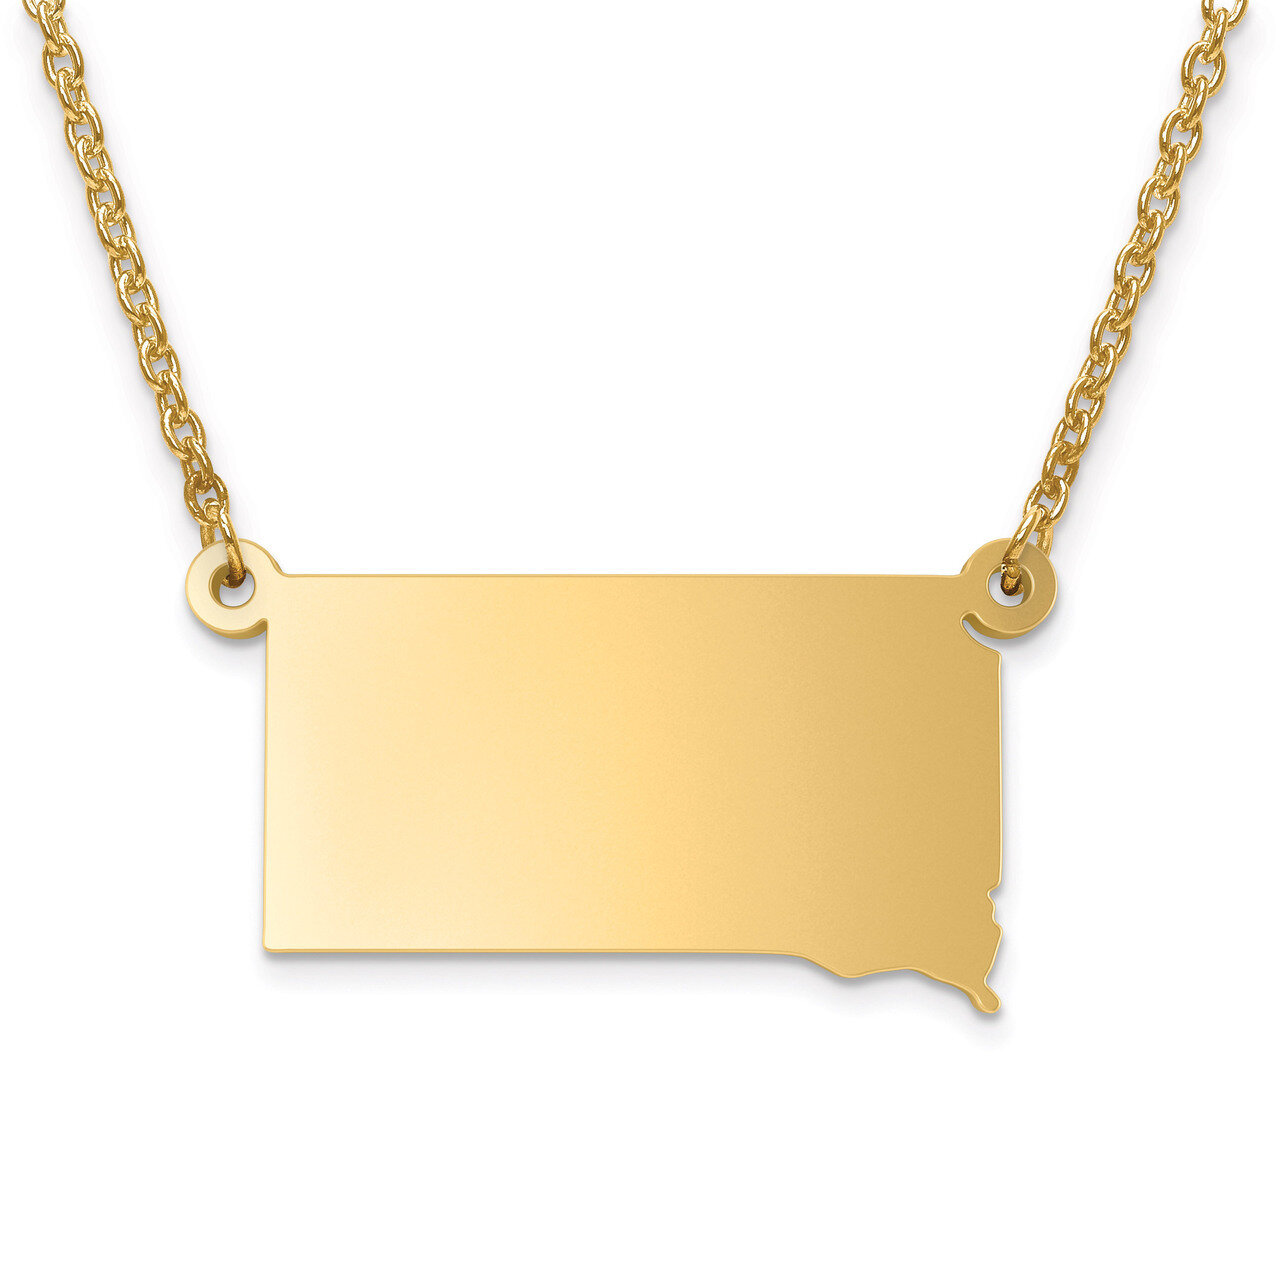 South Dakota State Pendant with Chain Engravable Gold-plated on Sterling Silver